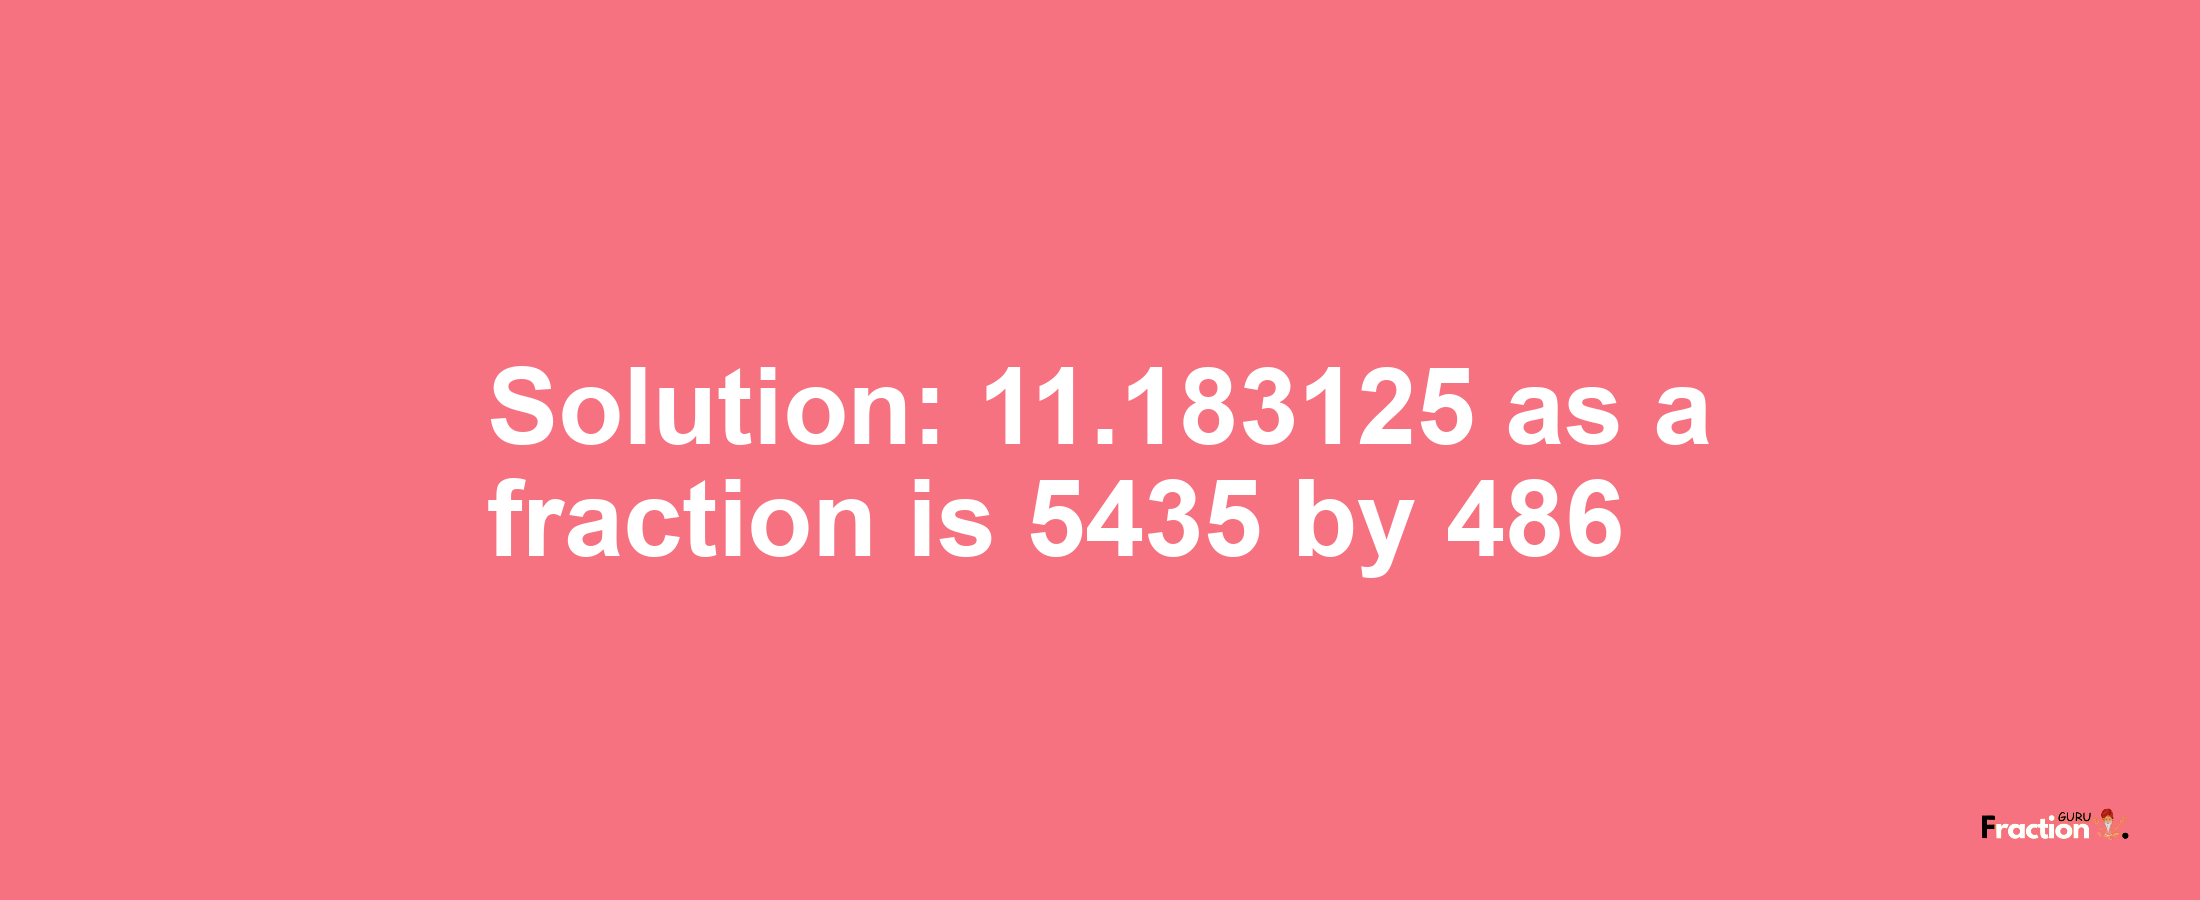 Solution:11.183125 as a fraction is 5435/486